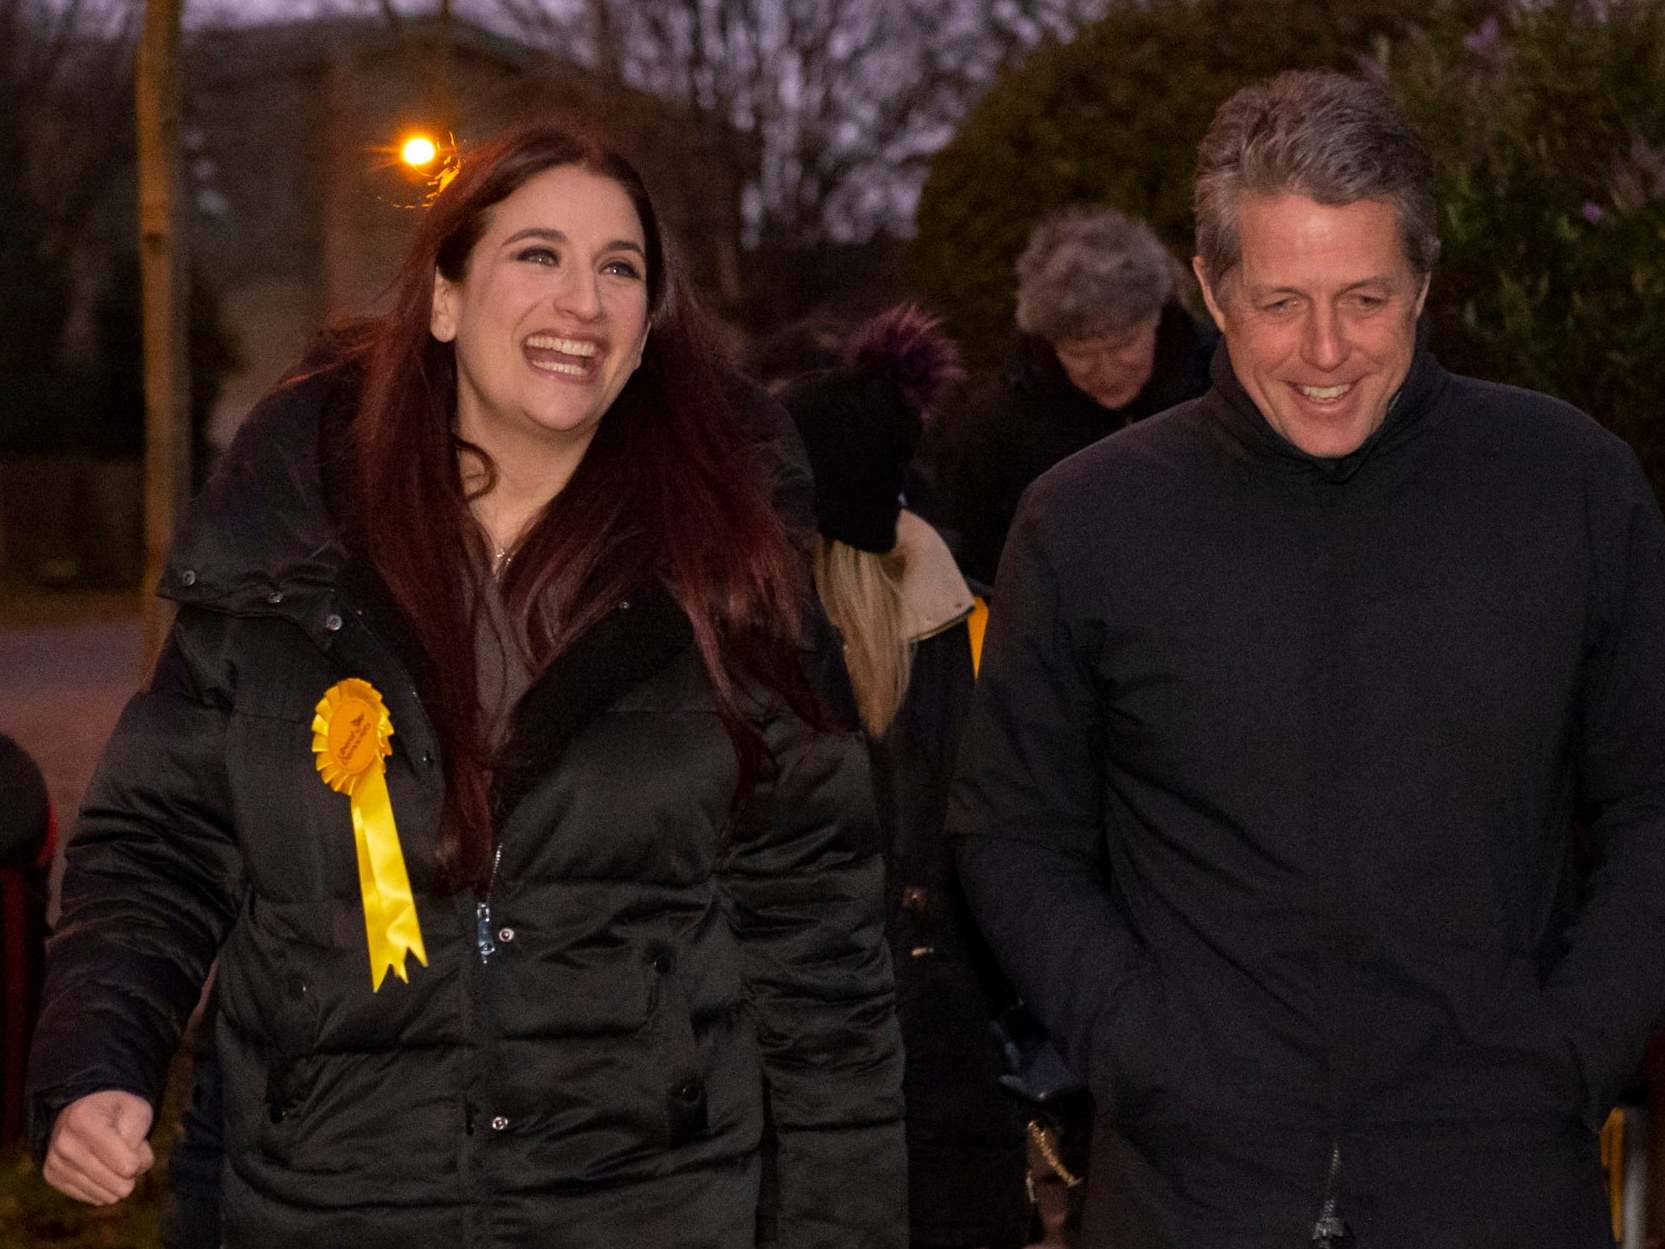 Then Liberal Democrat candidate Luciana Berger and Hugh Grant canvassing during the election